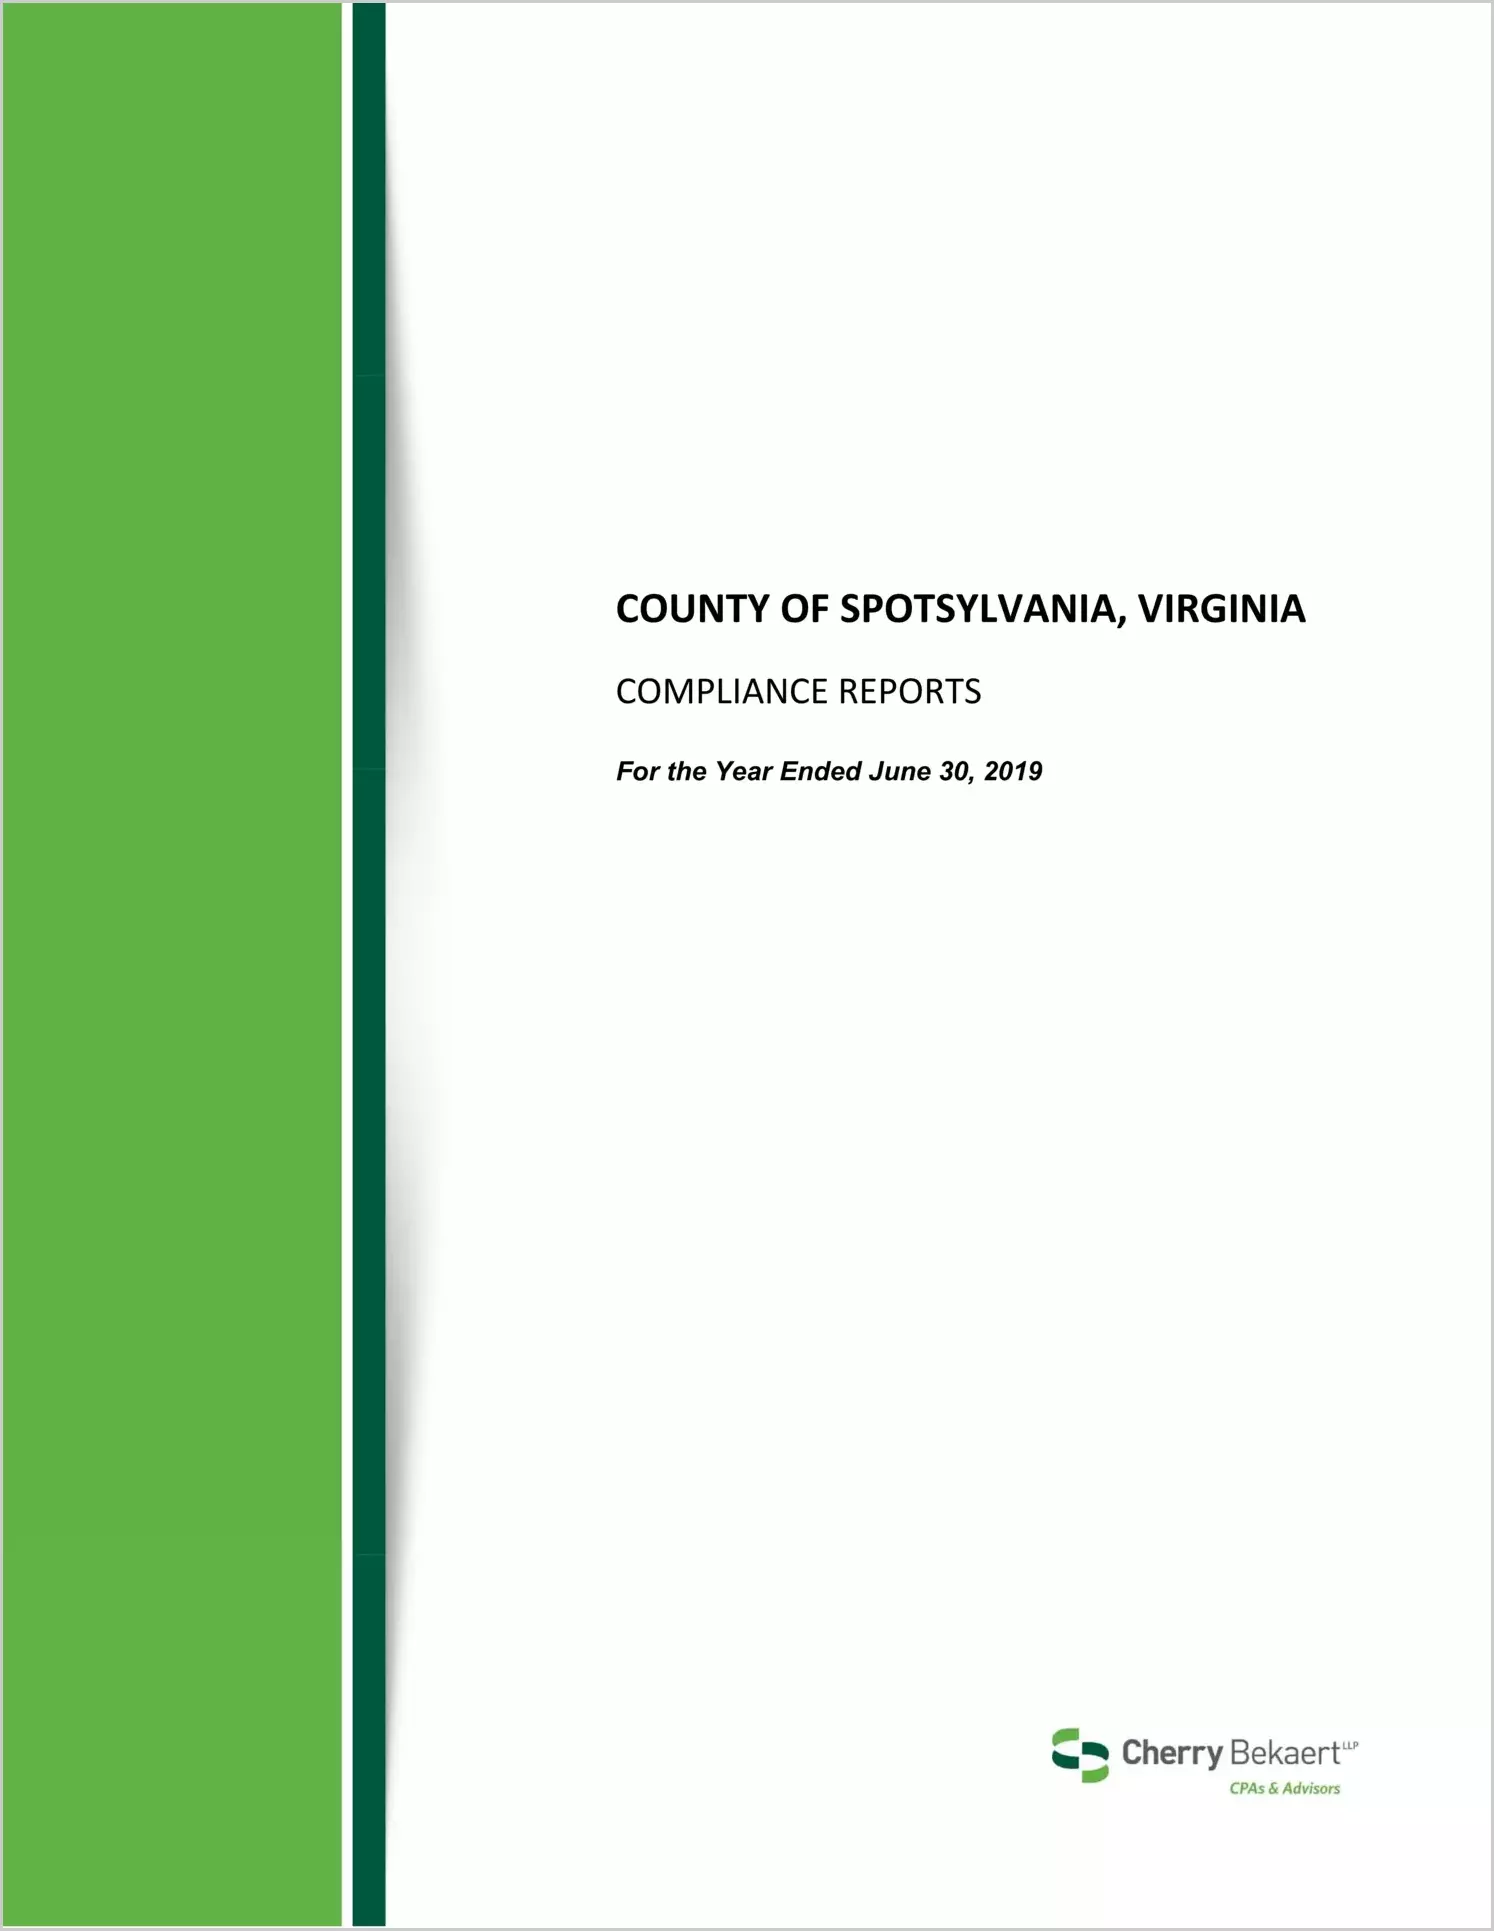 2019 Internal Control and Compliance Report for County of Spotsylvania